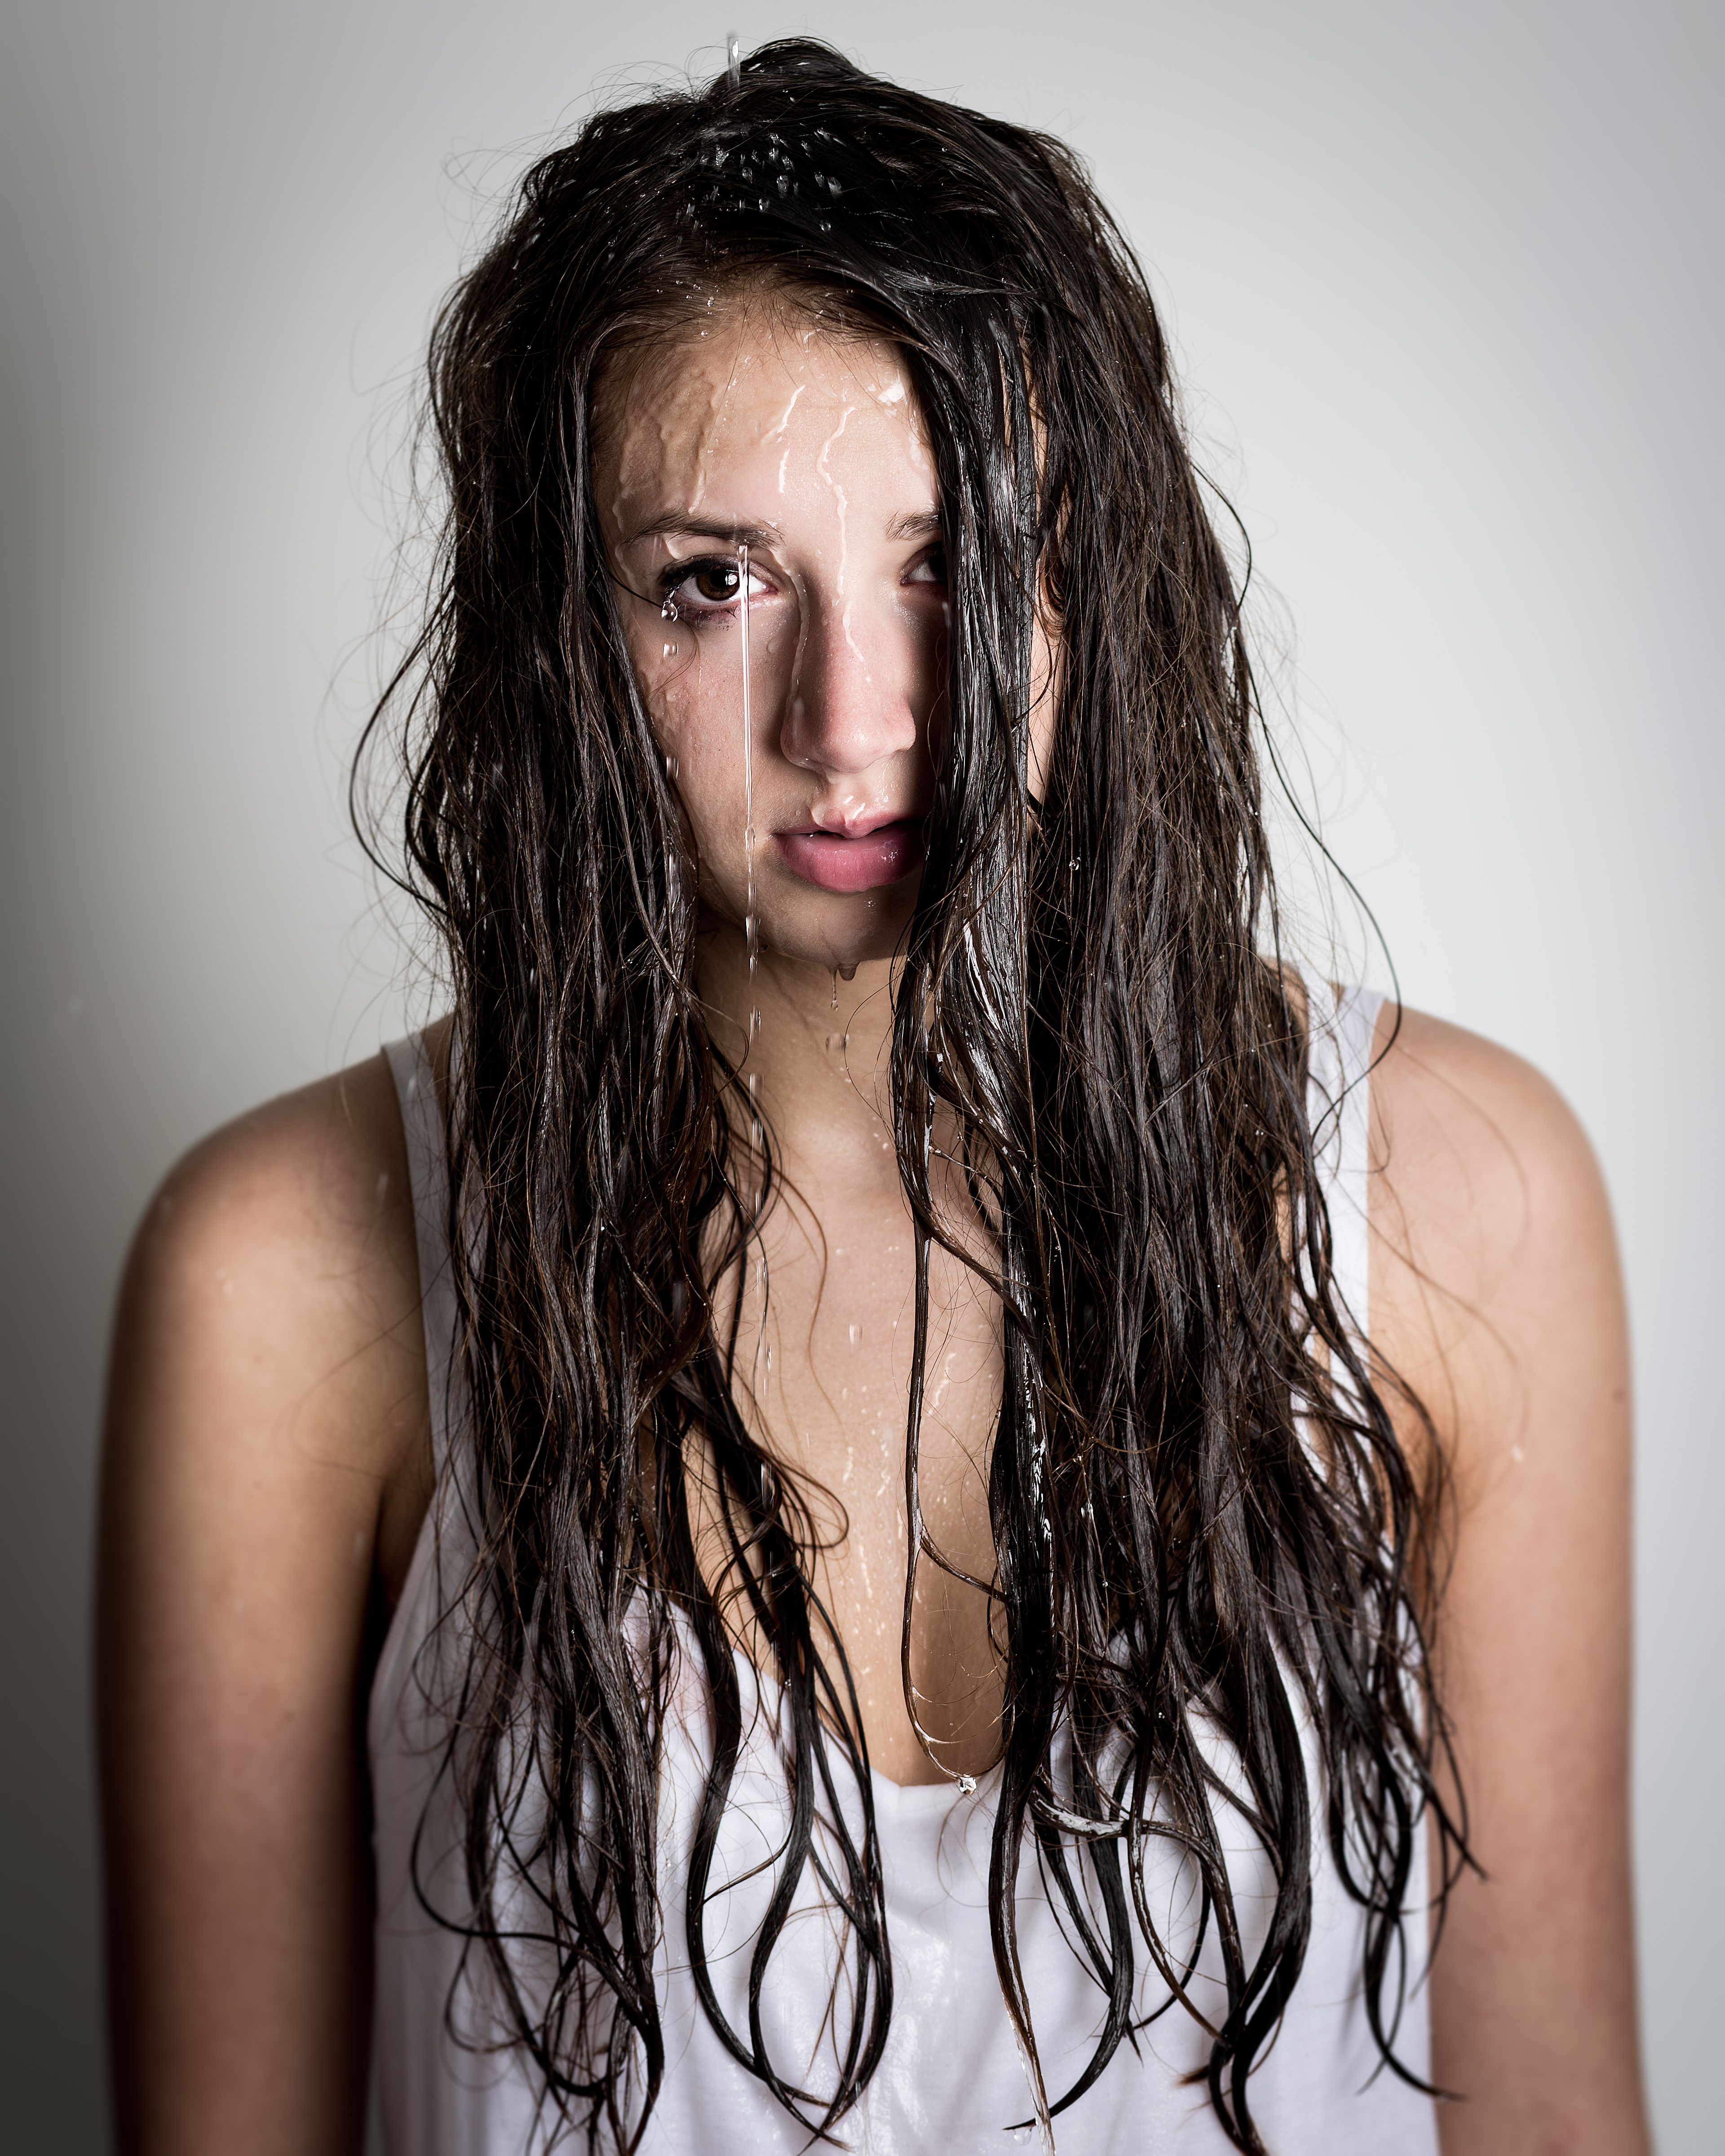 Teenage girl with water streaming down her face and hair | Source: Shutterstock.com